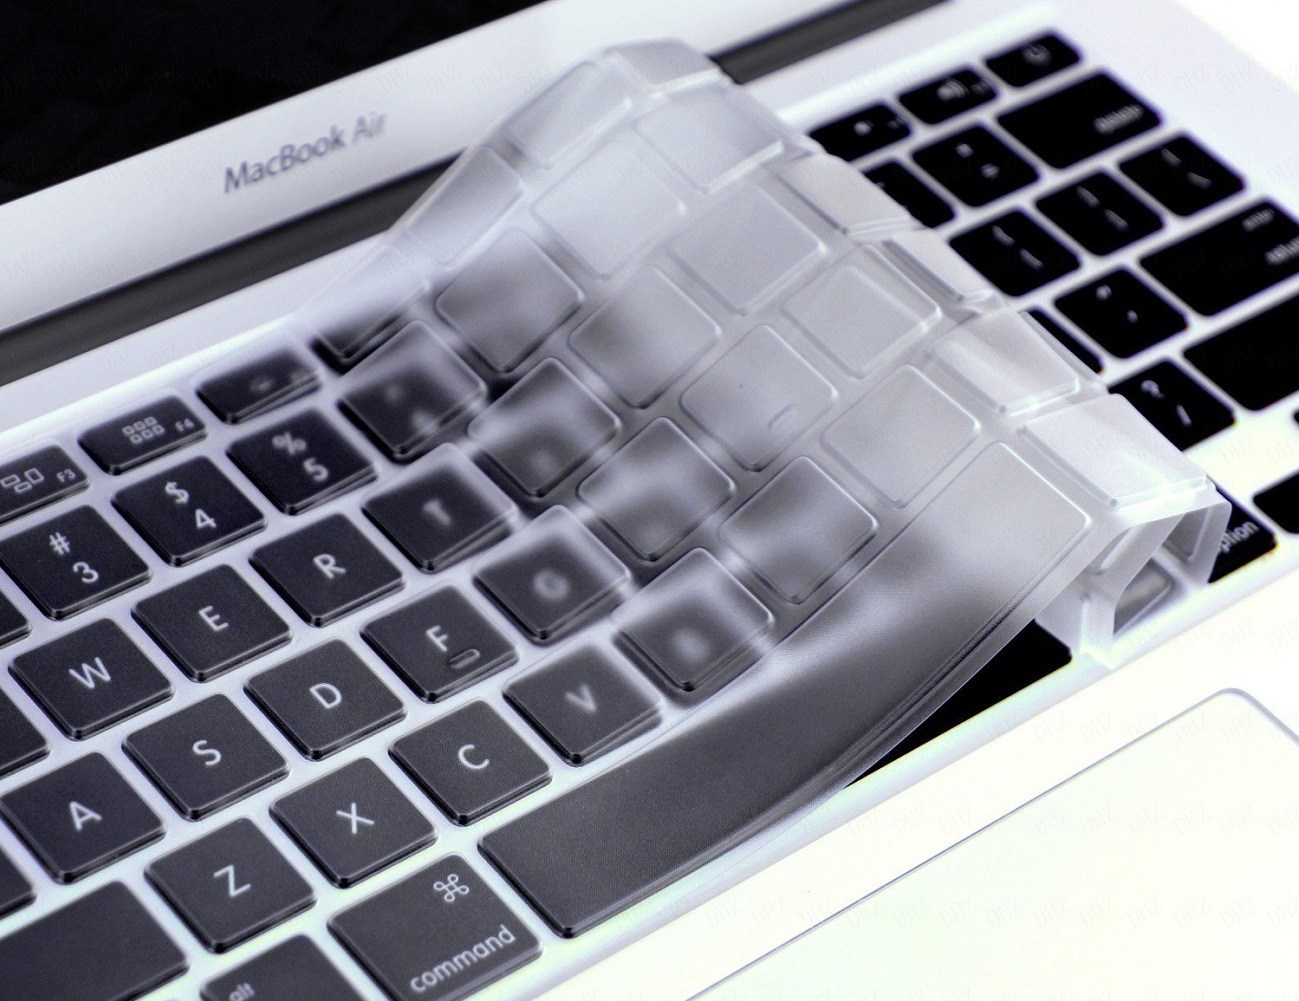 A keyboard cover for the MacBook... gross.